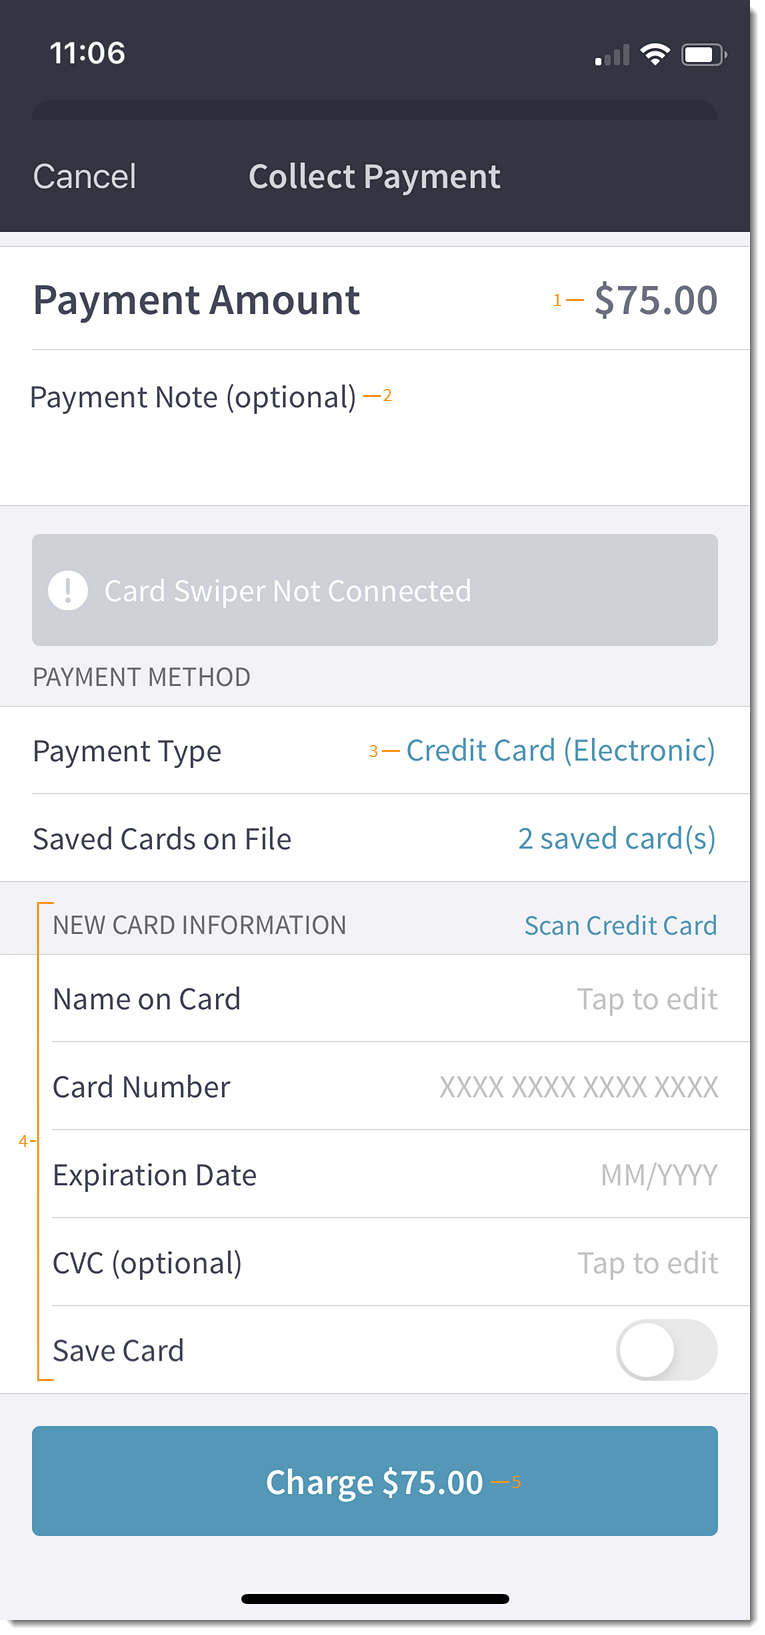 Mobile_CollectPayment_Collect.png